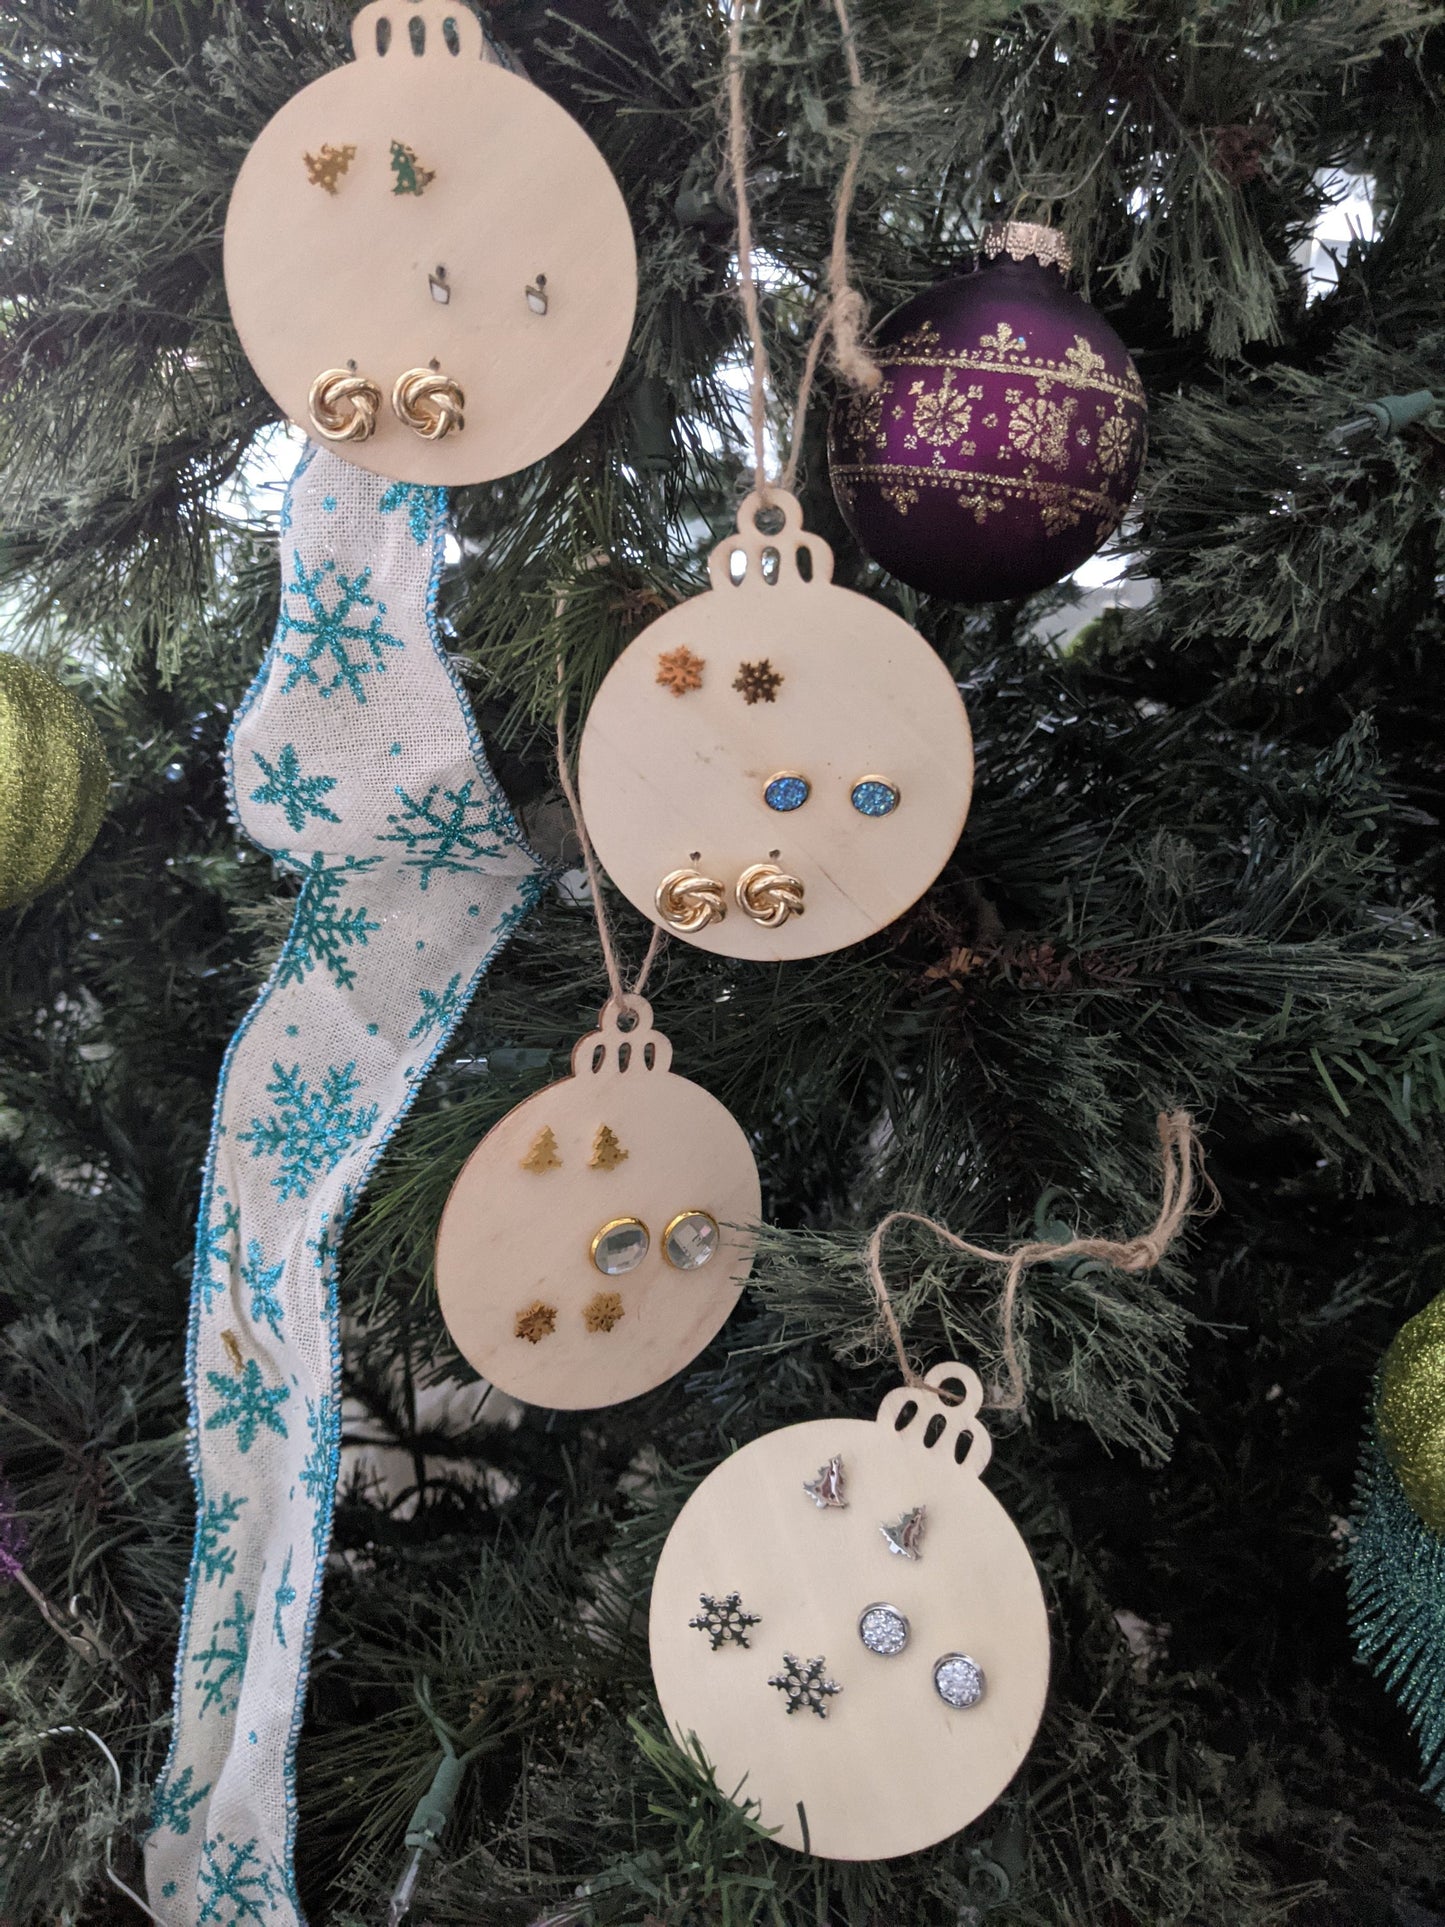 Set of 3 stud earrings on a wooden Christmas ornament